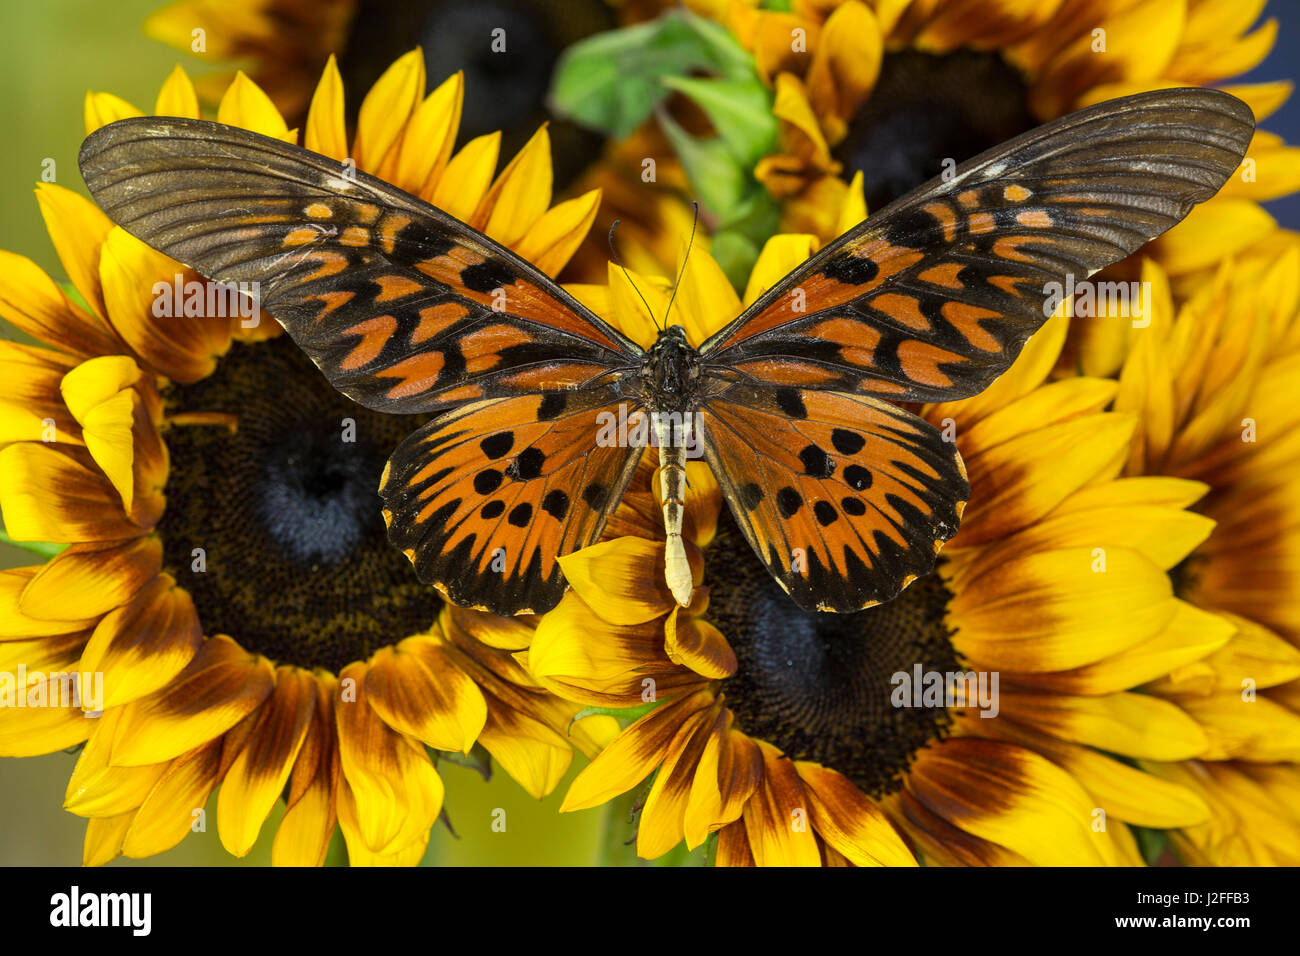 Giant African Swallowtail Butterfly, Papilio antimachus Stock Photo